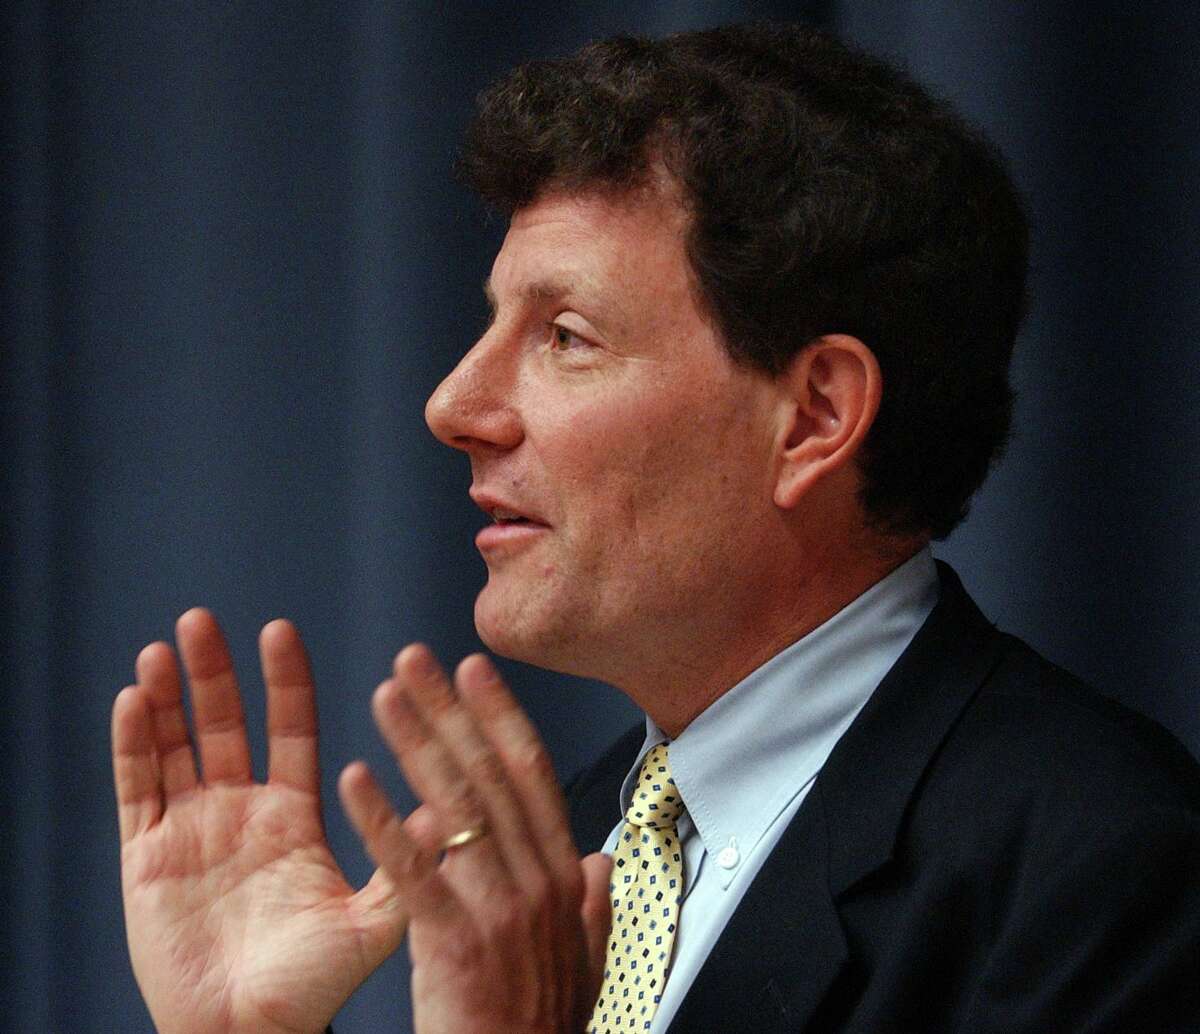 Nicholas Kristof addresses an audience at Yale University. The longtime New York Times columnist is exploring a run for governor in Oregon in 2022.